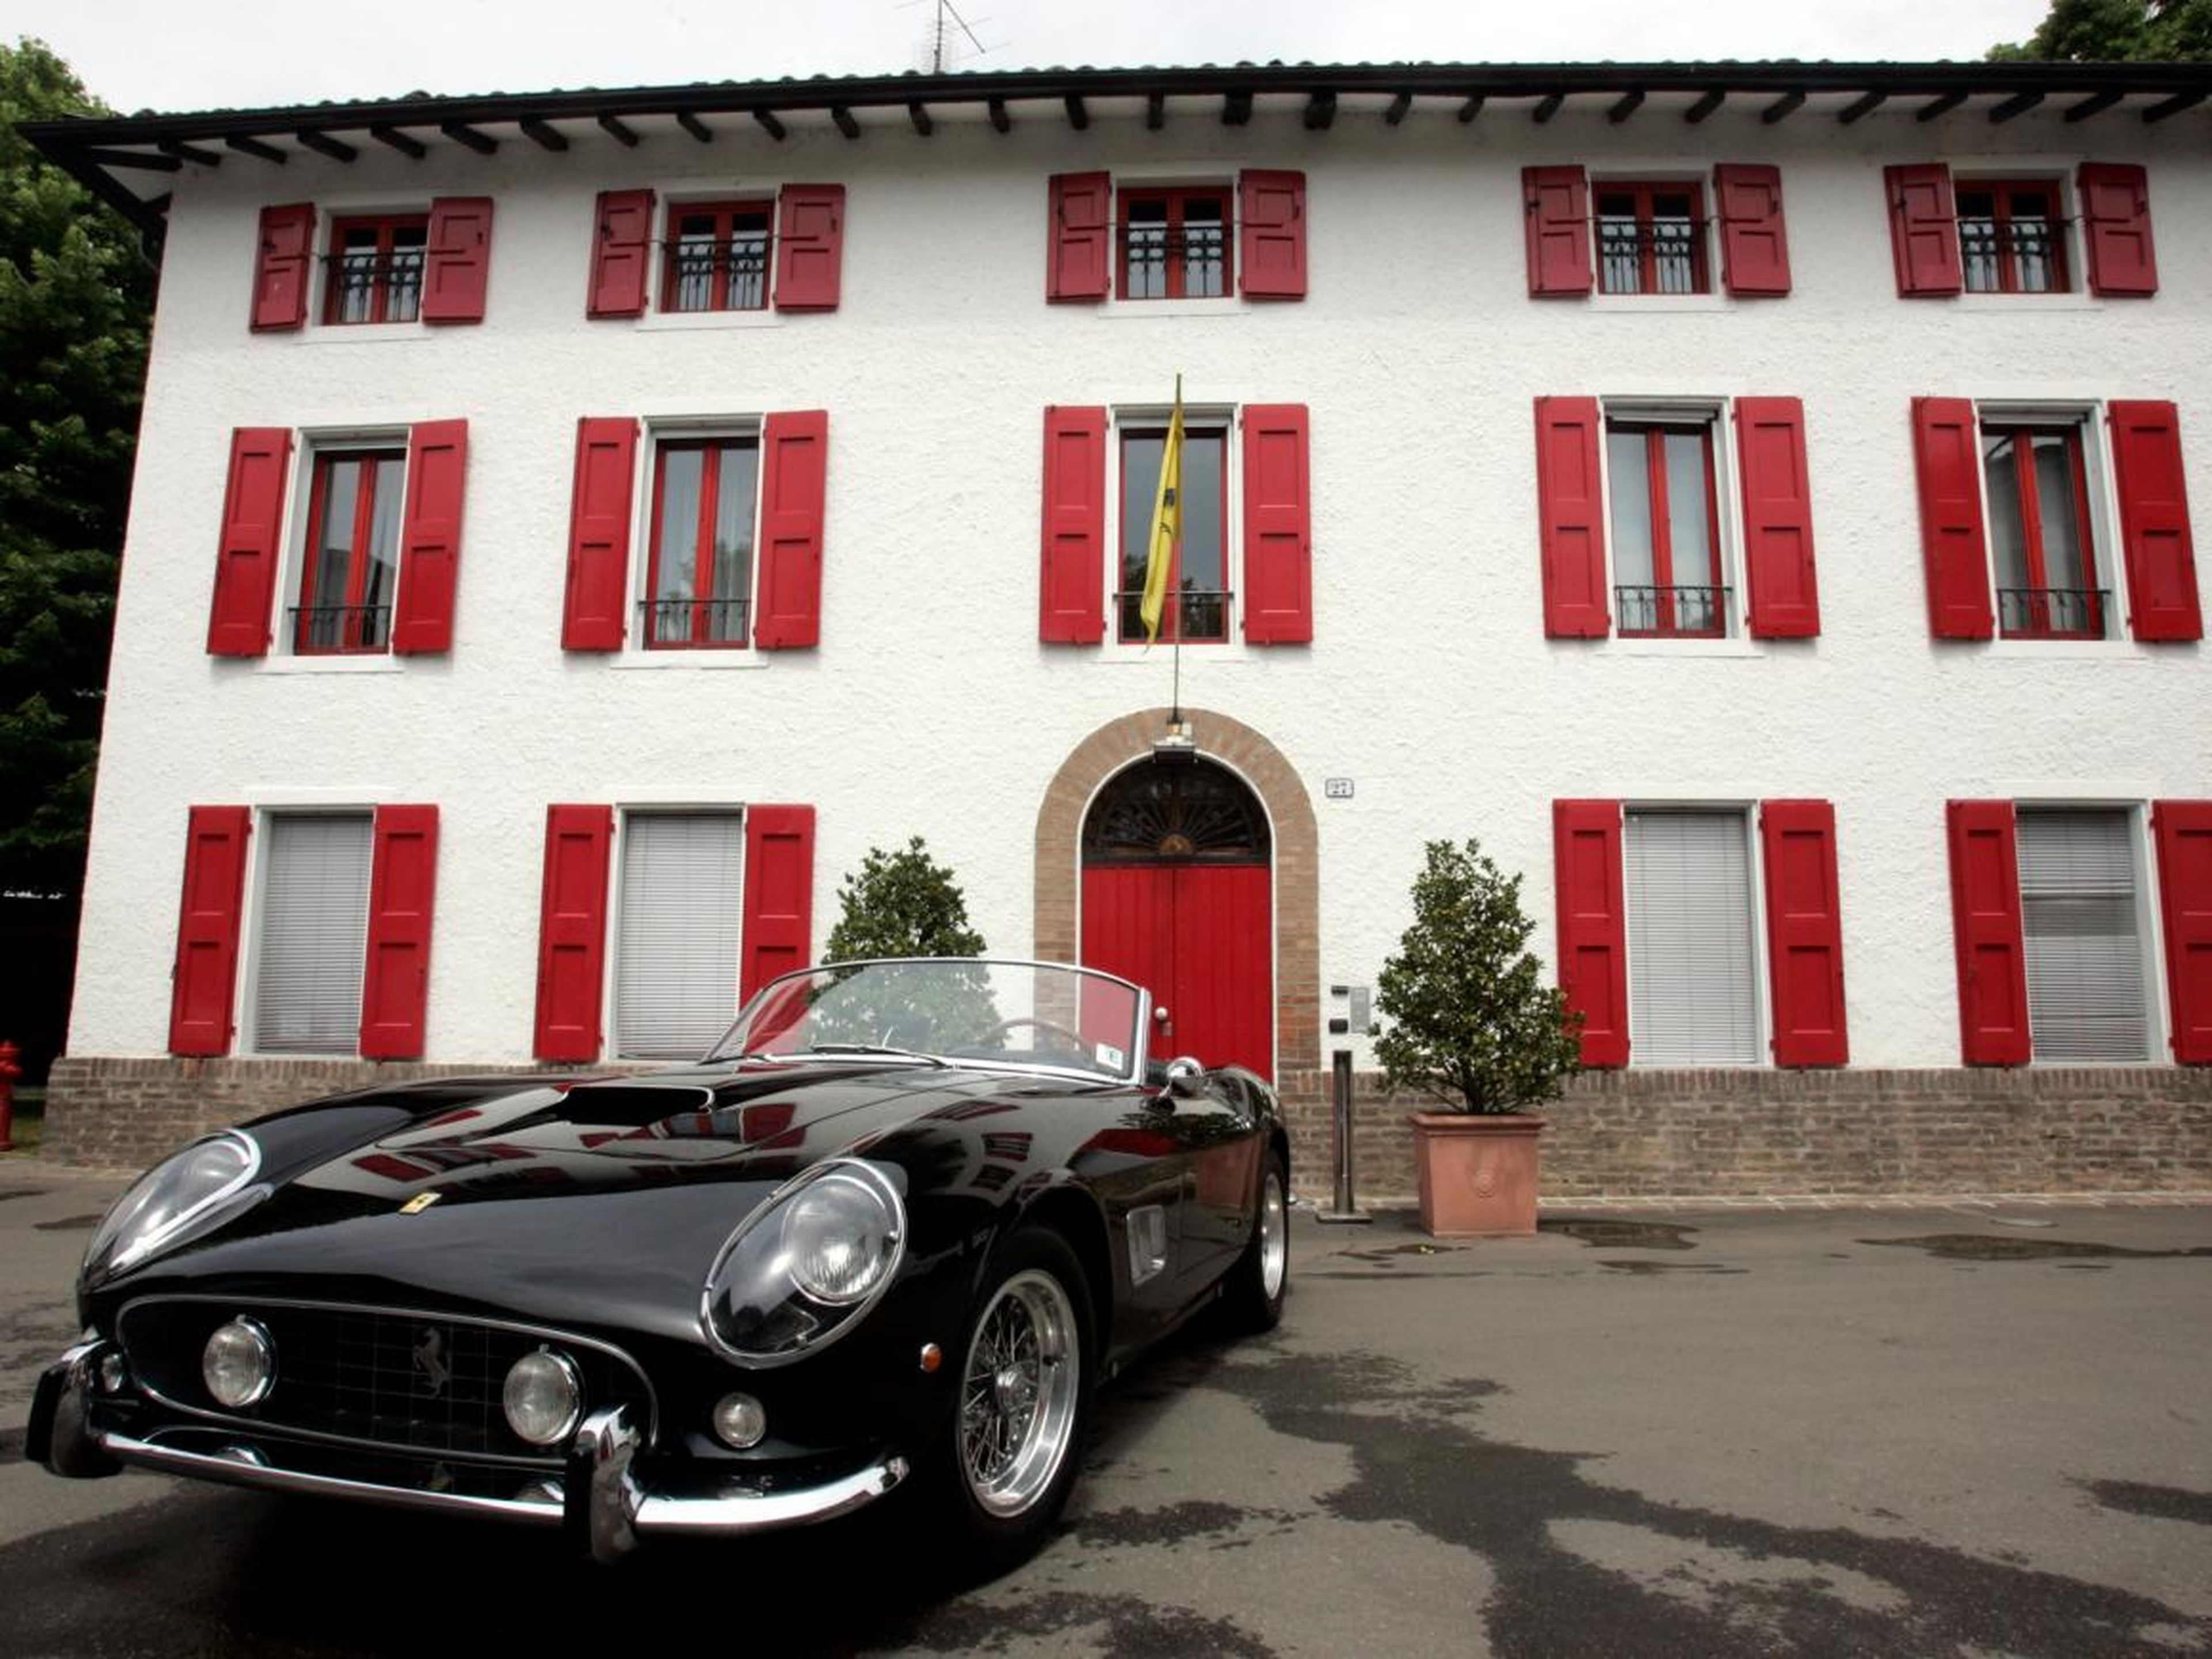 The US became a huge market for Ferrari's cars. Even today, it remains Ferrari's most lucrative market. This opened the floodgates for Ferrari's business. Legendary cars such as the California Spider ....